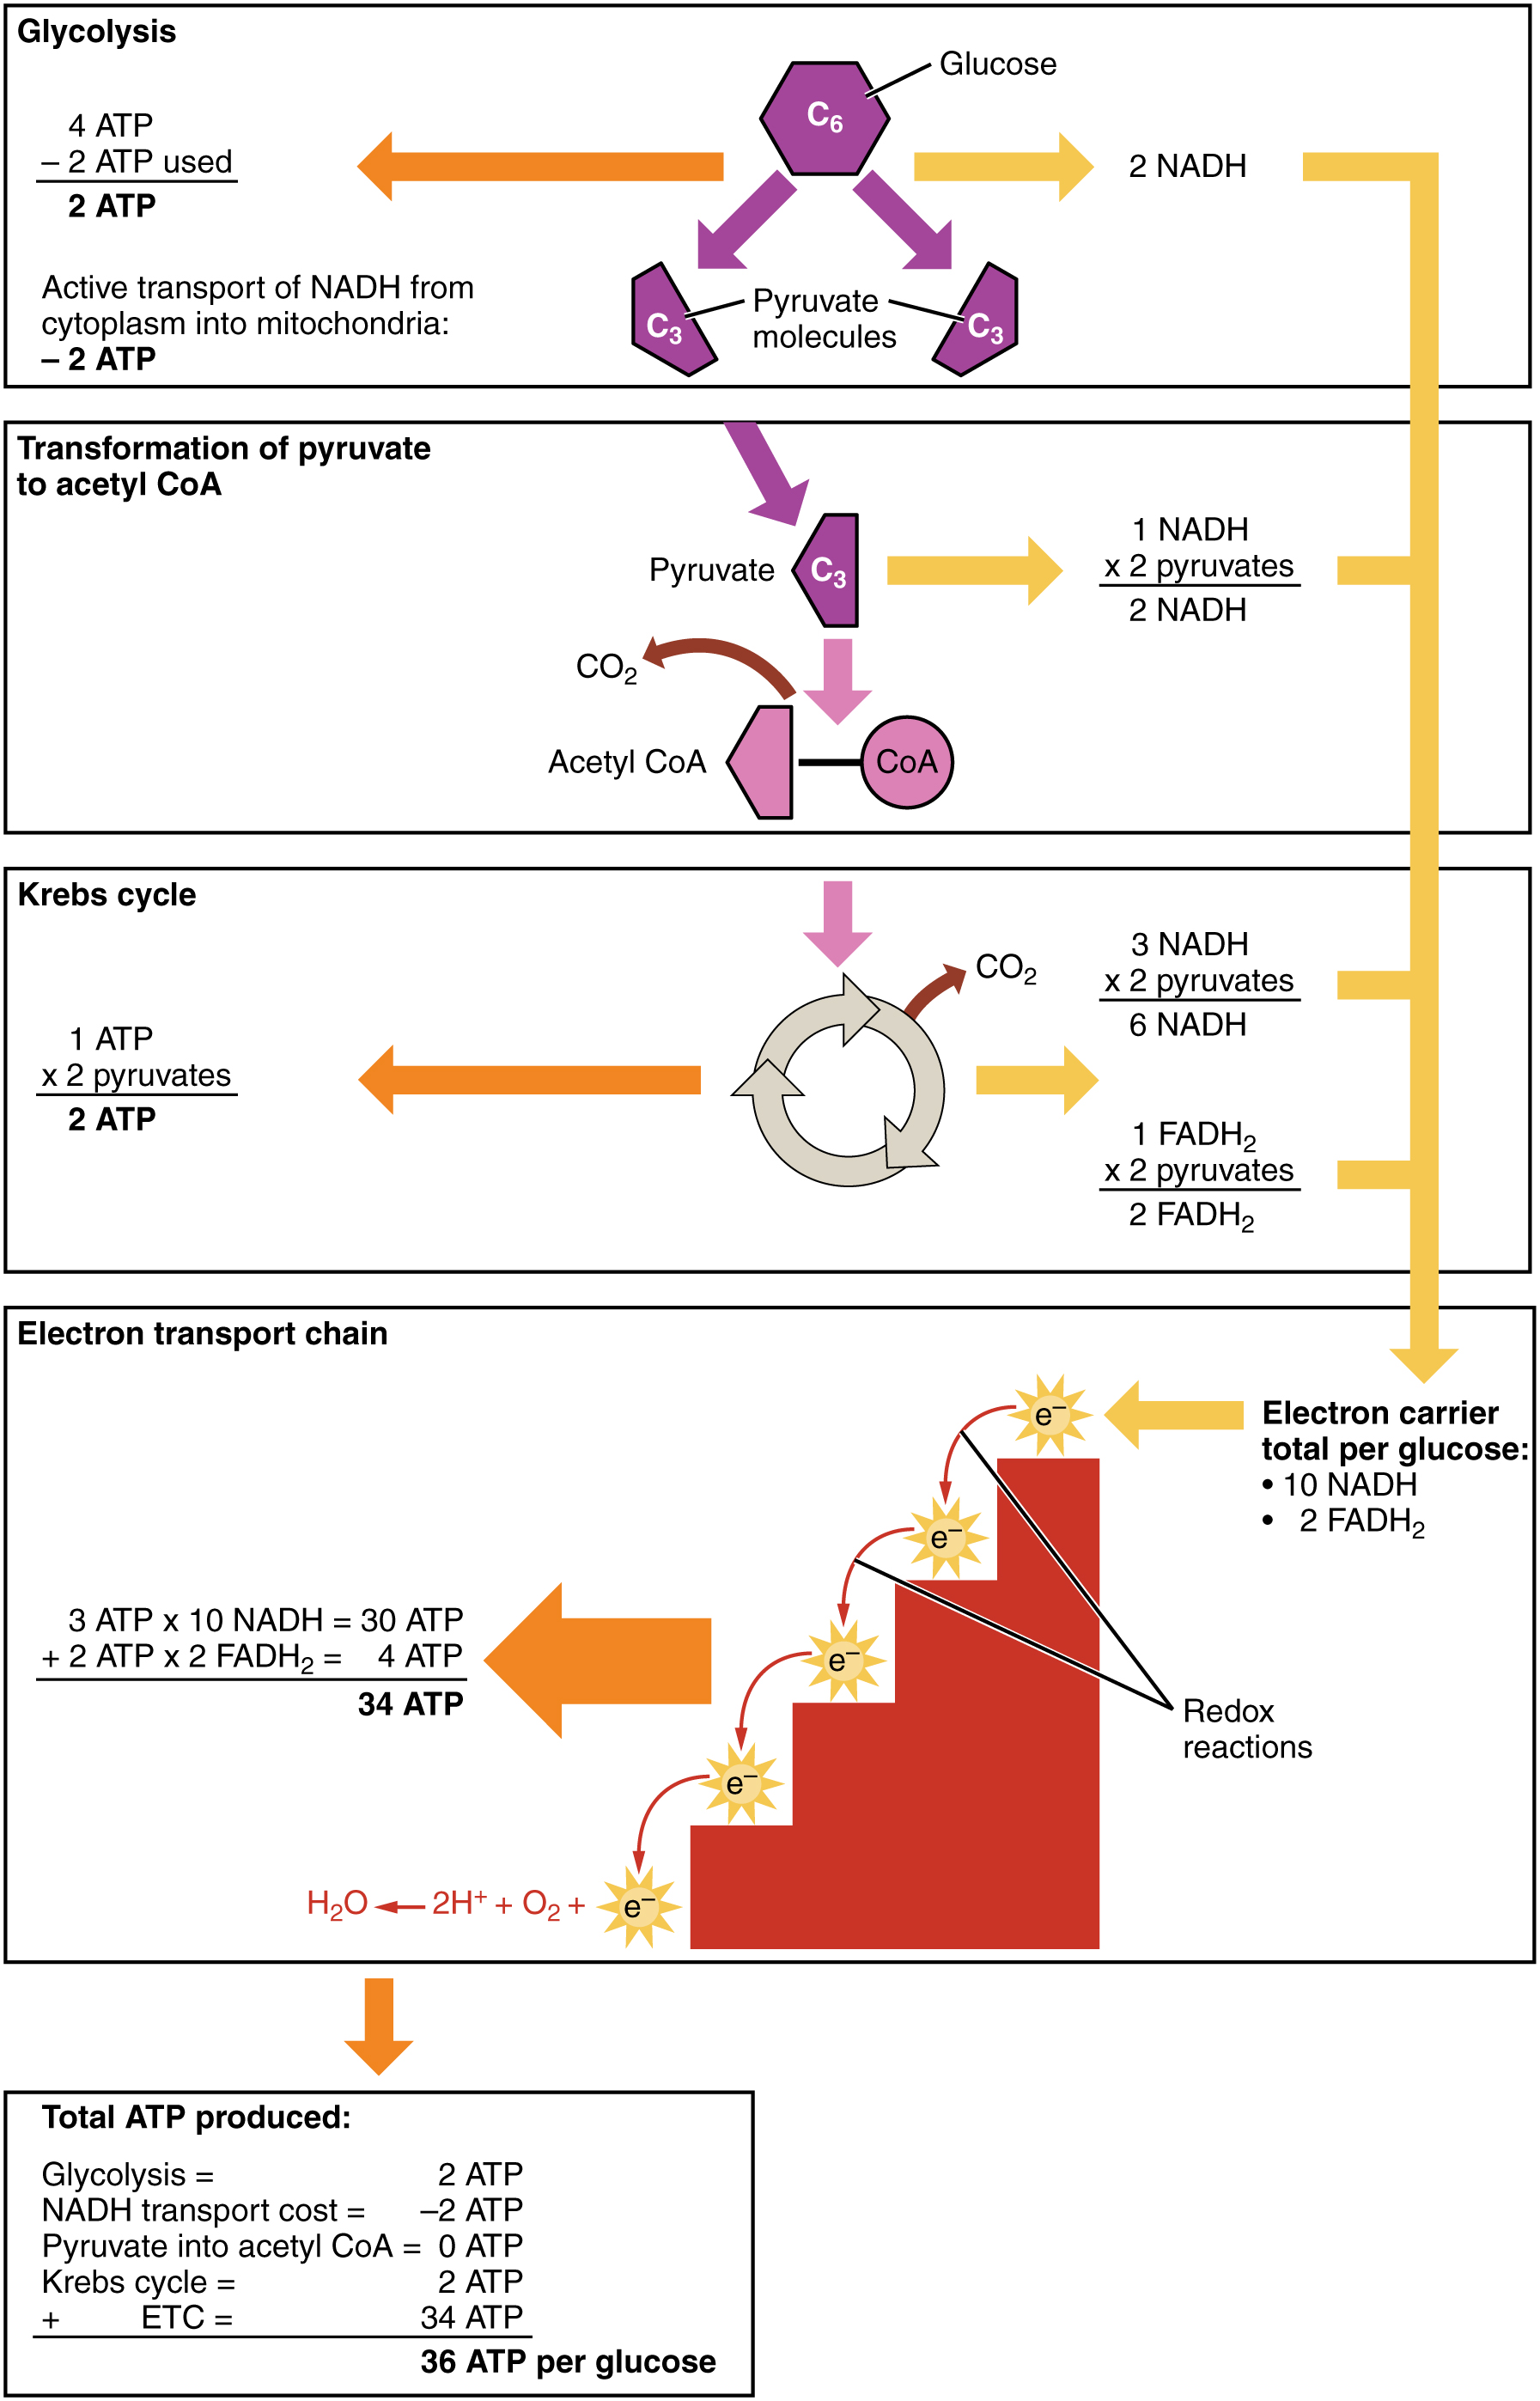 This figure shows the different steps in which carbohydrates are metabolized and lists the number of ATP molecules produced in each step. The different steps shown are glycolysis, transformation of pyruvate to acetyl-CoA, the Krebs cycle, and the electron transport chain.